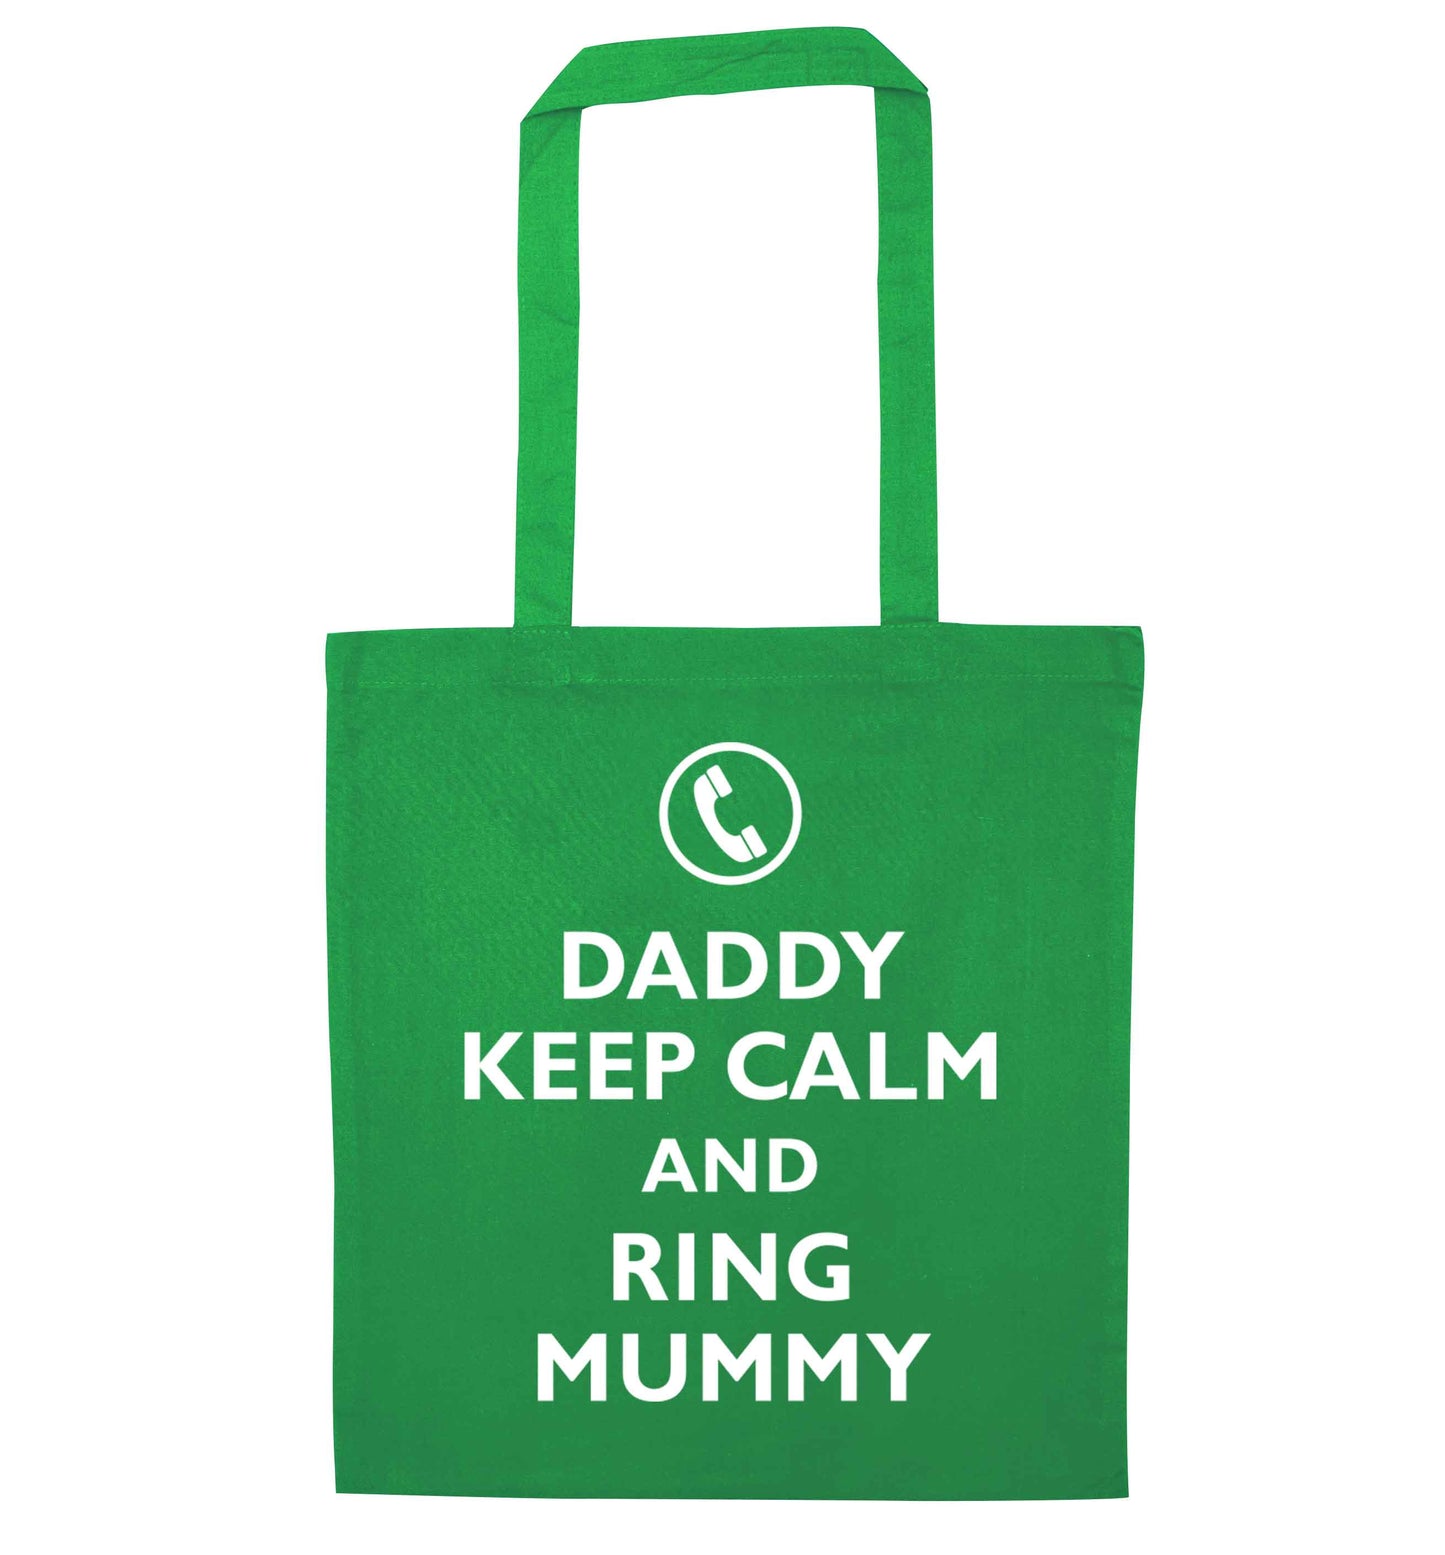 Daddy keep calm and ring mummy green tote bag